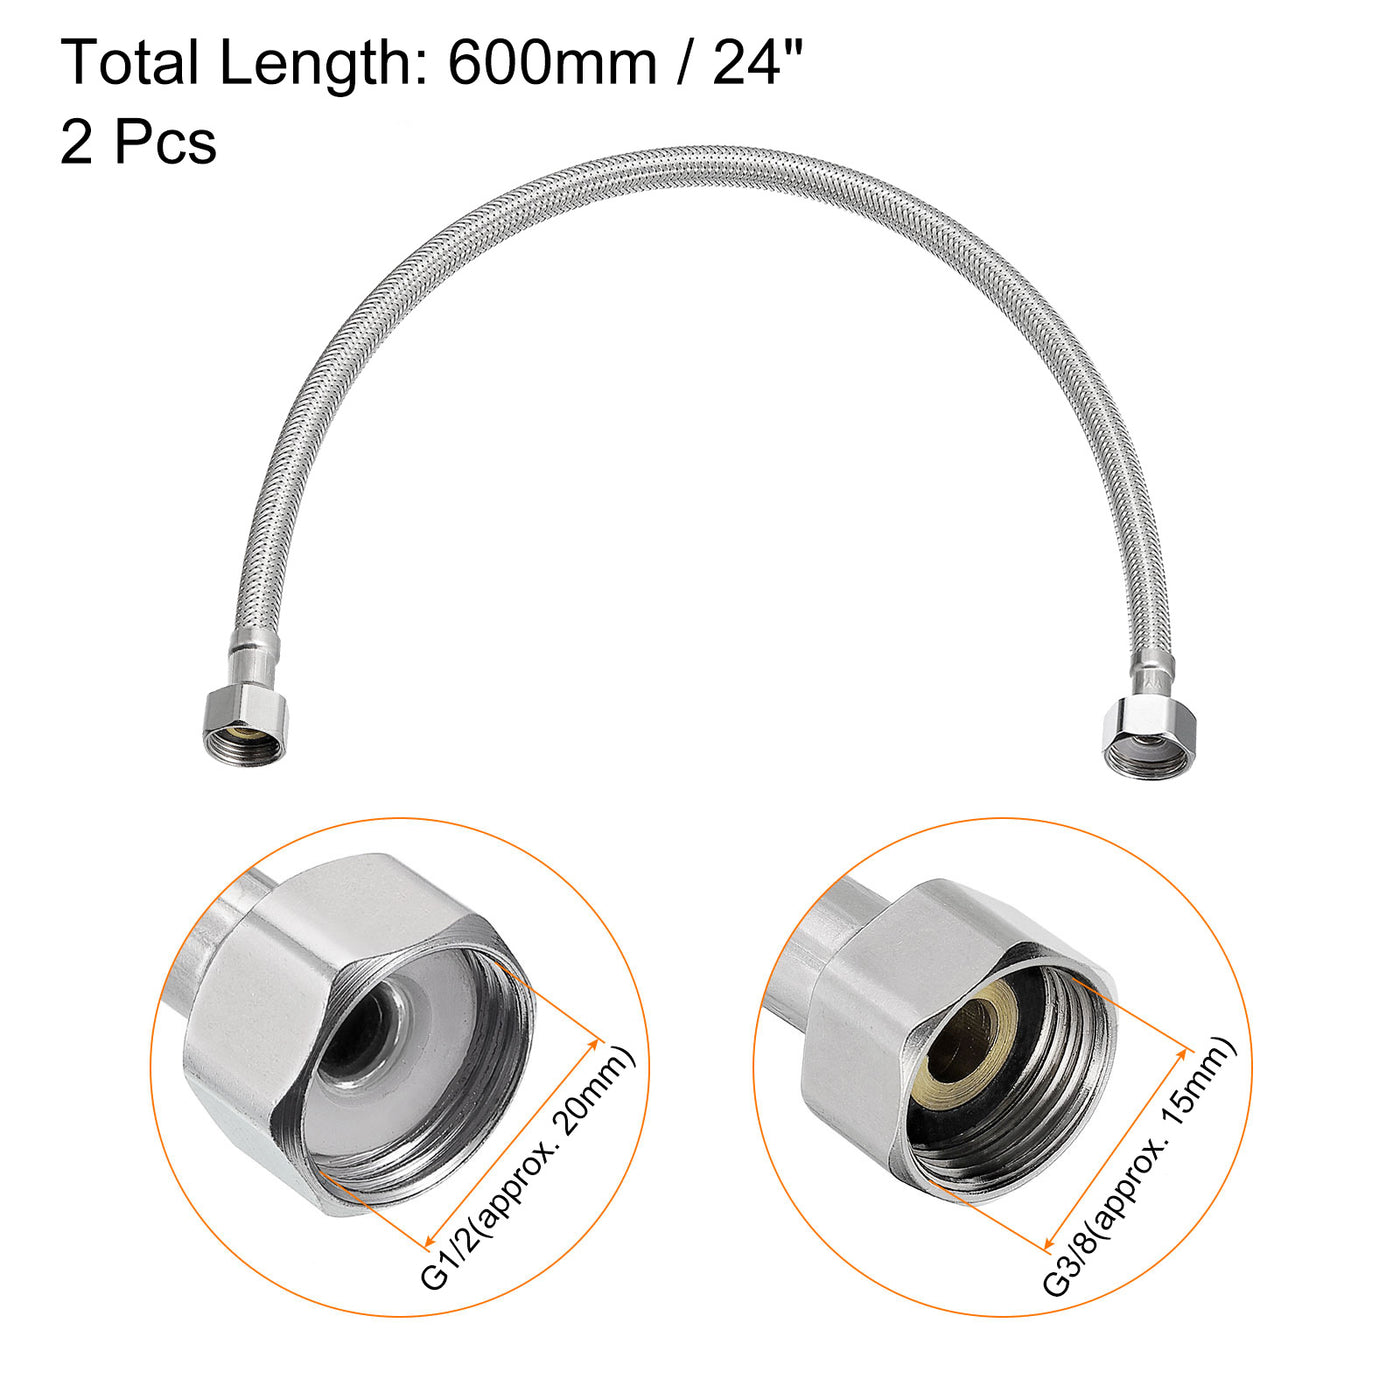 uxcell Uxcell 24 Inch Long Faucet Supply Line Connector, 2pcs G3/8 Female Compression Thread x G1/2 Female Straight Thread 304 Stainless Steel Water Supply Hose